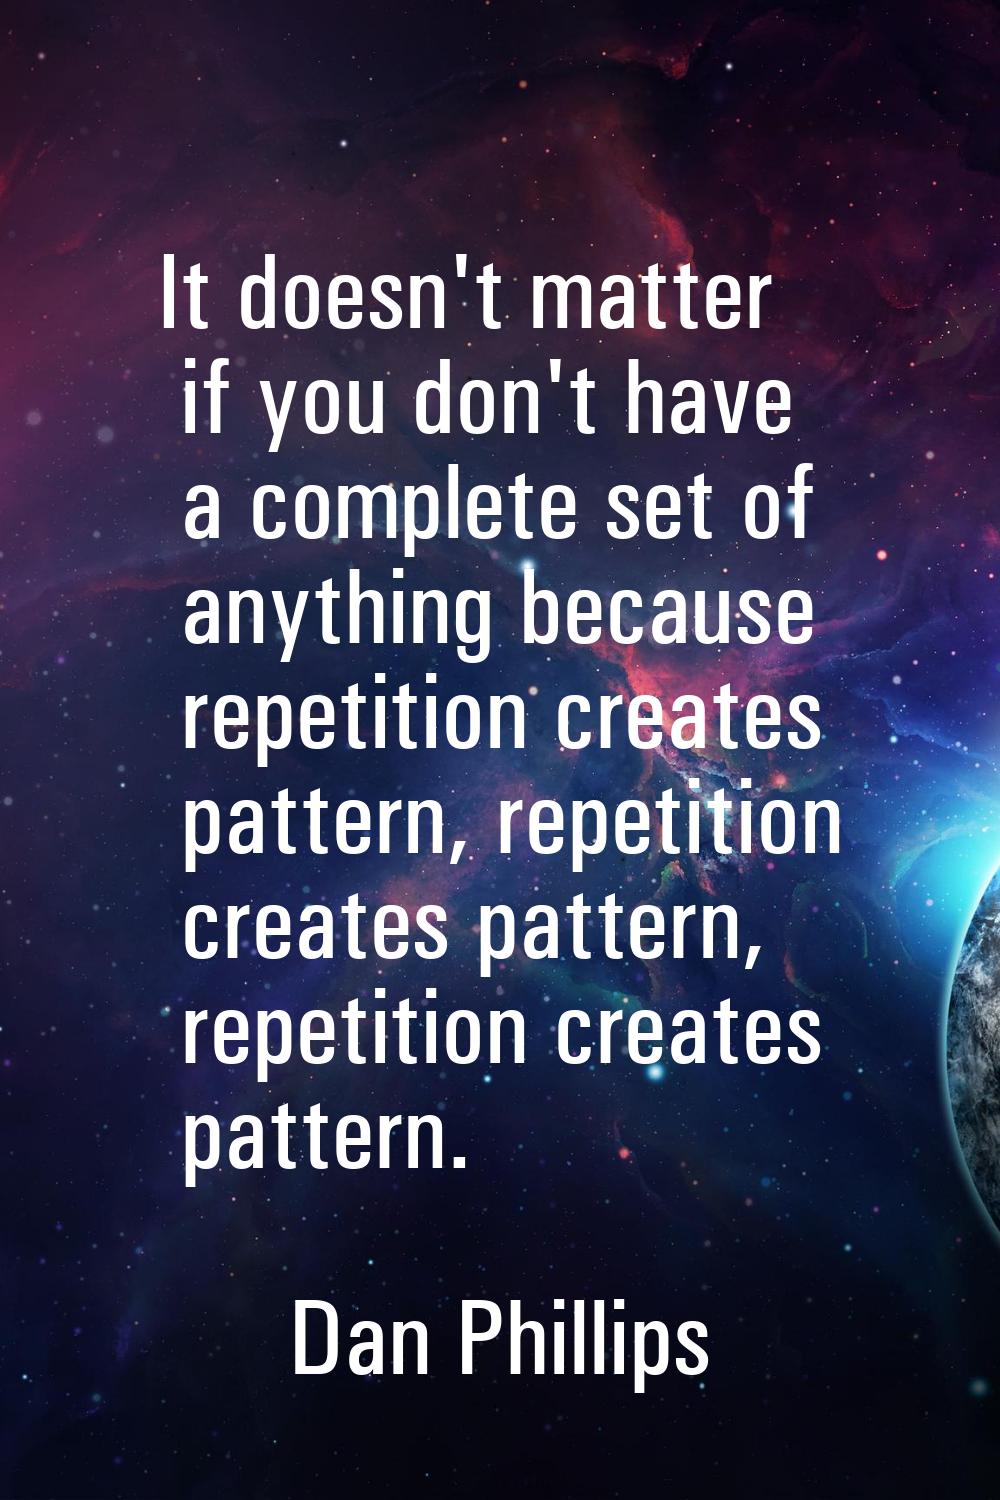 It doesn't matter if you don't have a complete set of anything because repetition creates pattern, 